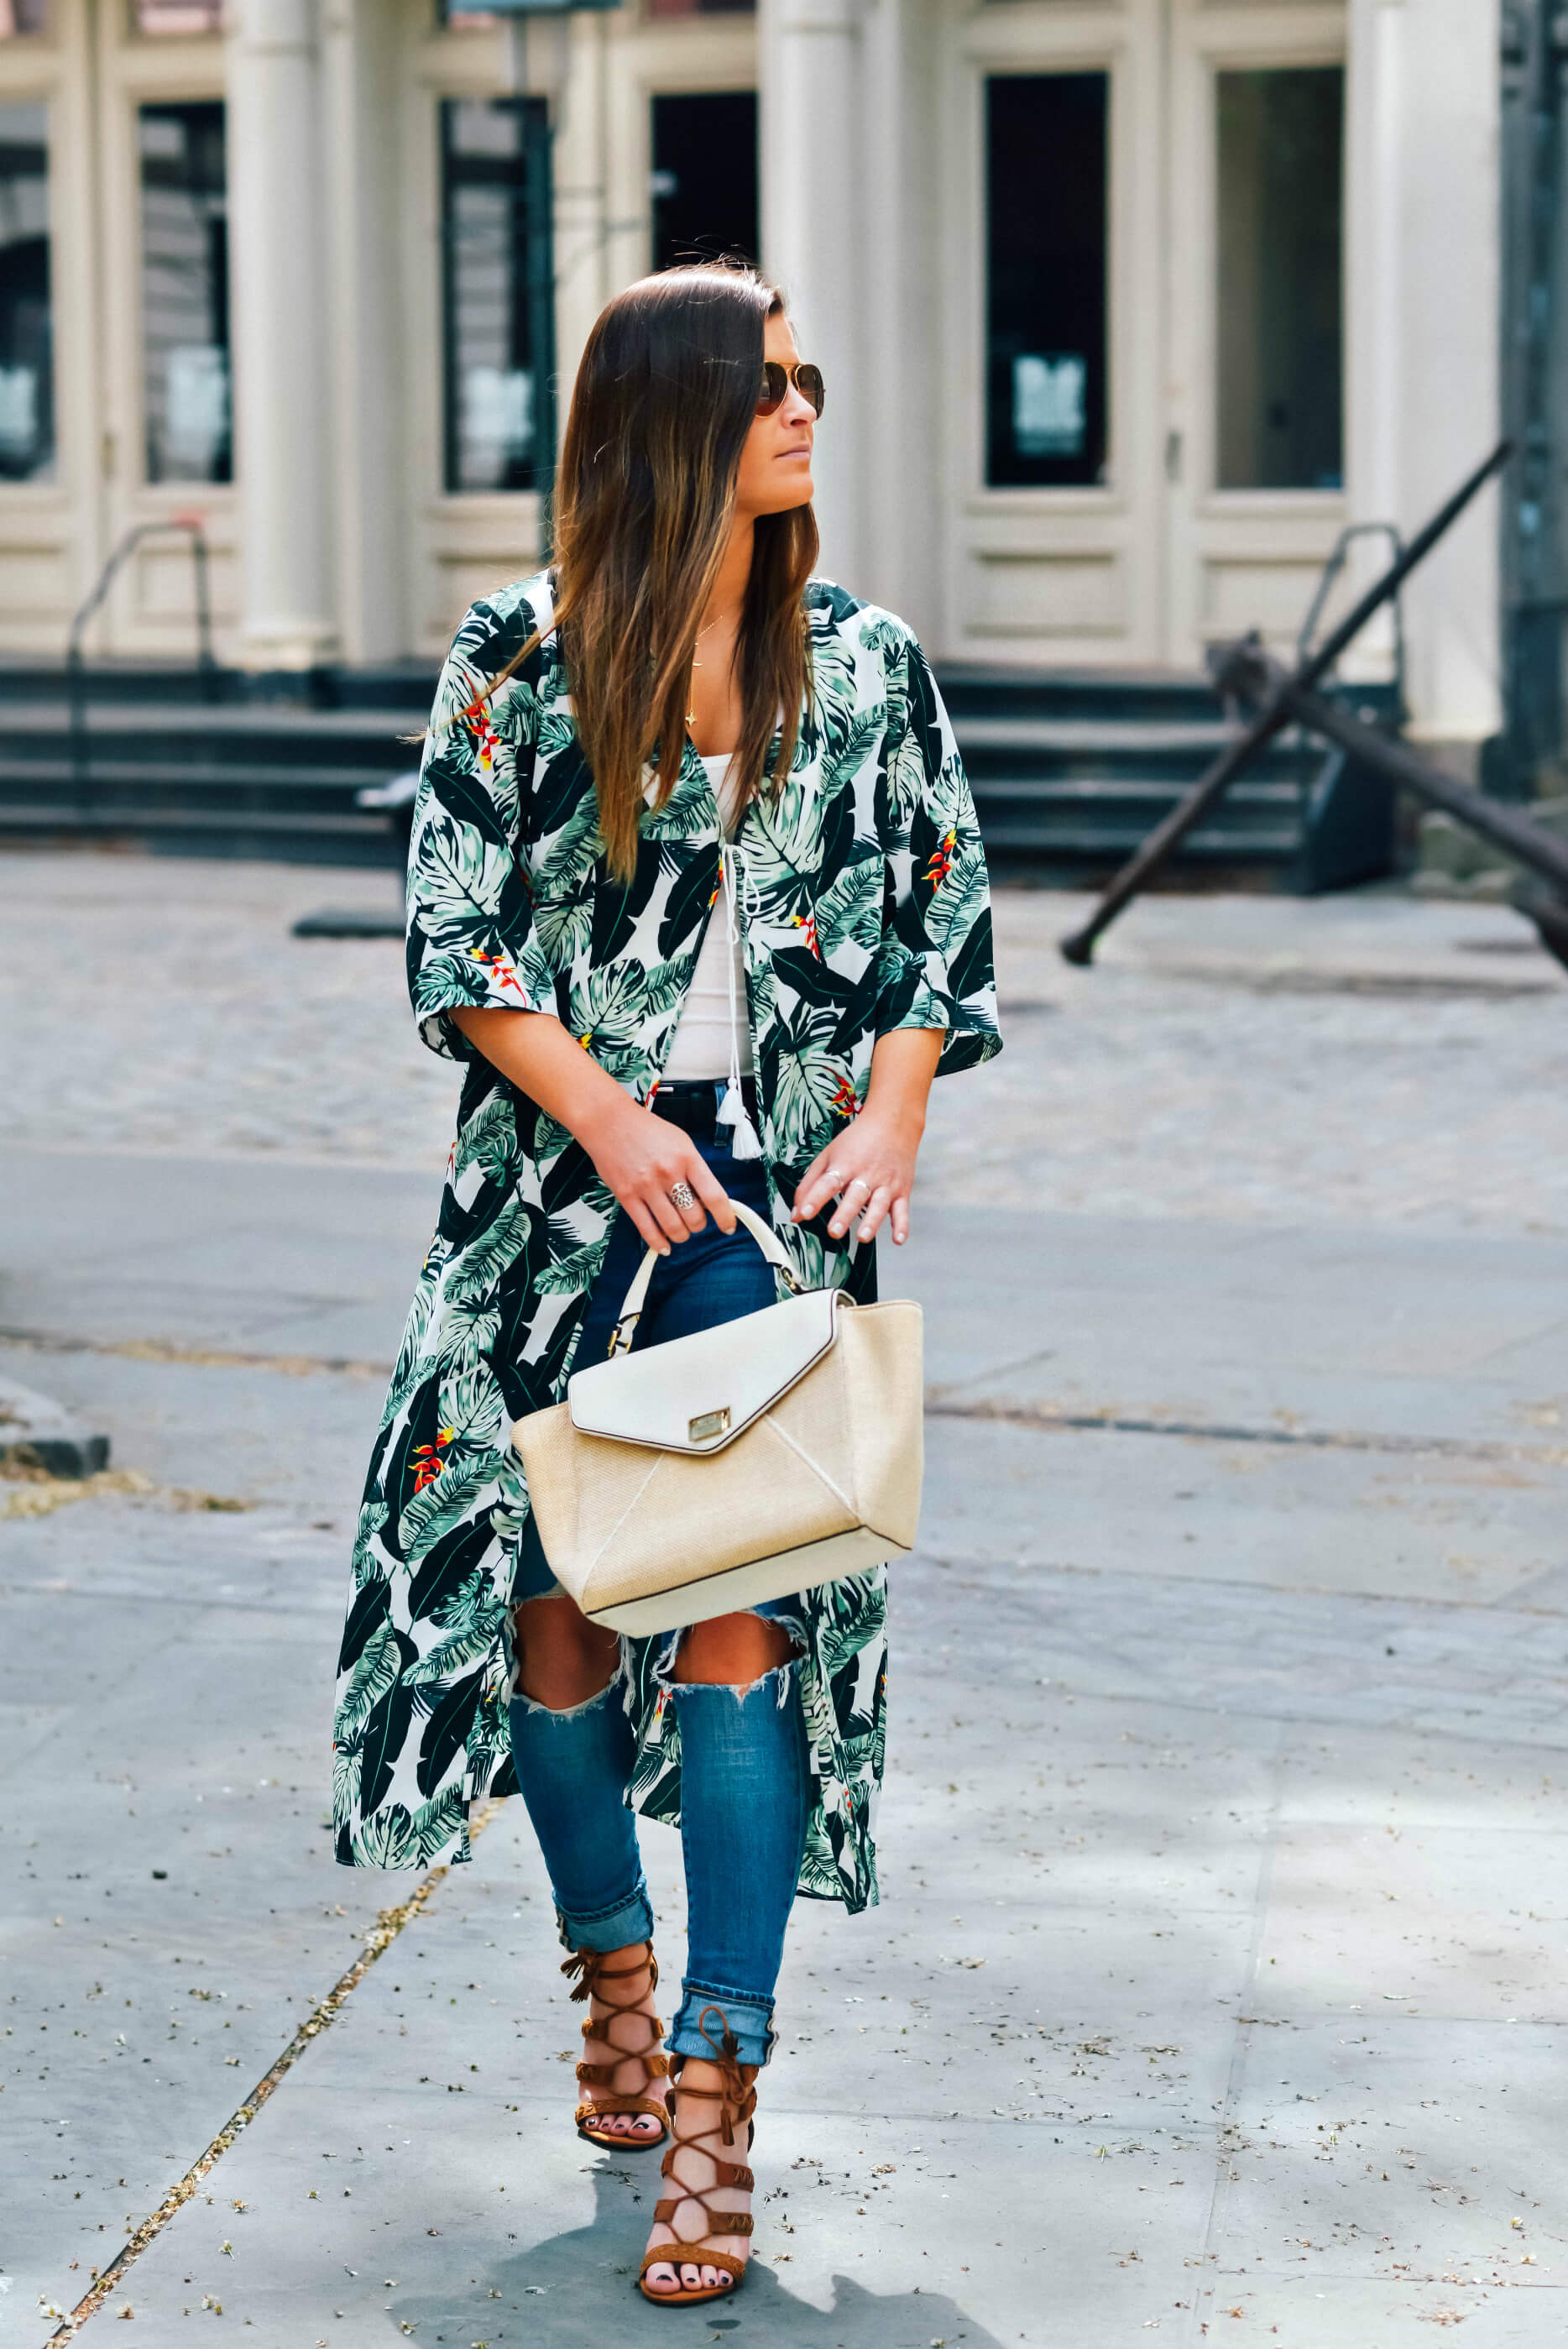 Rachel Zoe Collection Palm Print Duster, Kate Spade Straw Bag, Spring Style, Tilden of To Be Bright